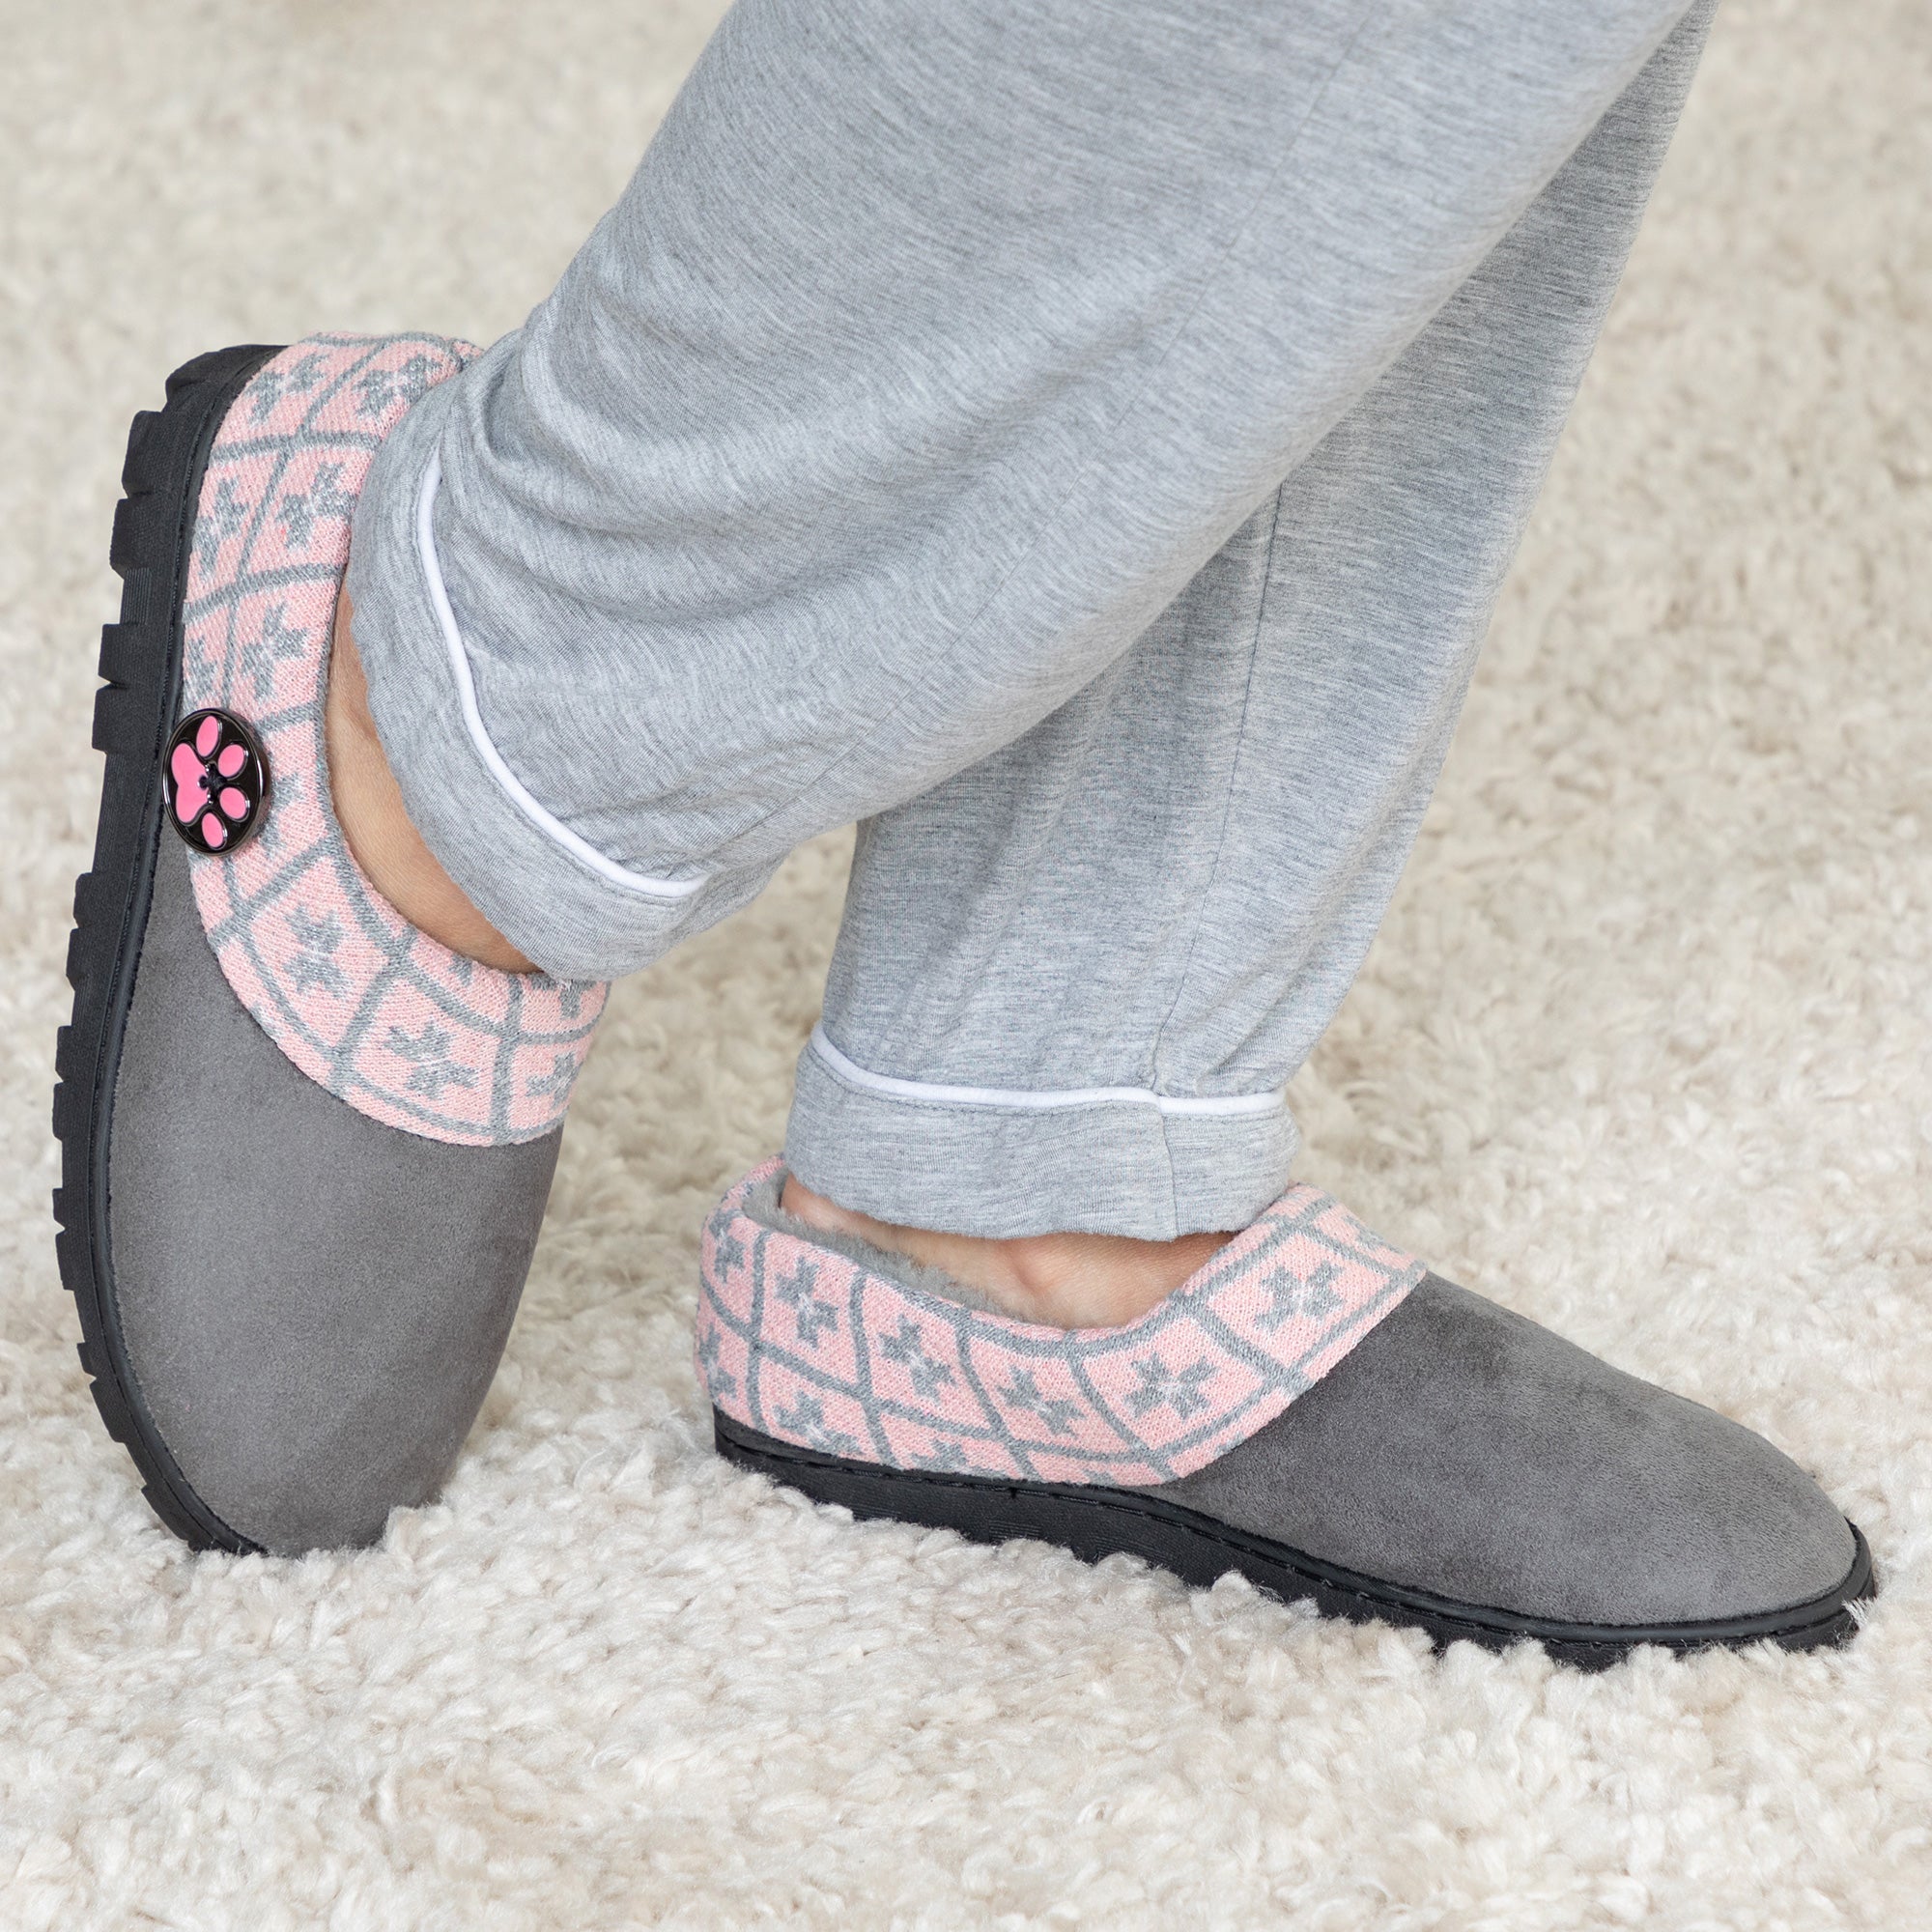 Purple Paw Women's Comfy Clog Slippers - Pink/Gray - 10